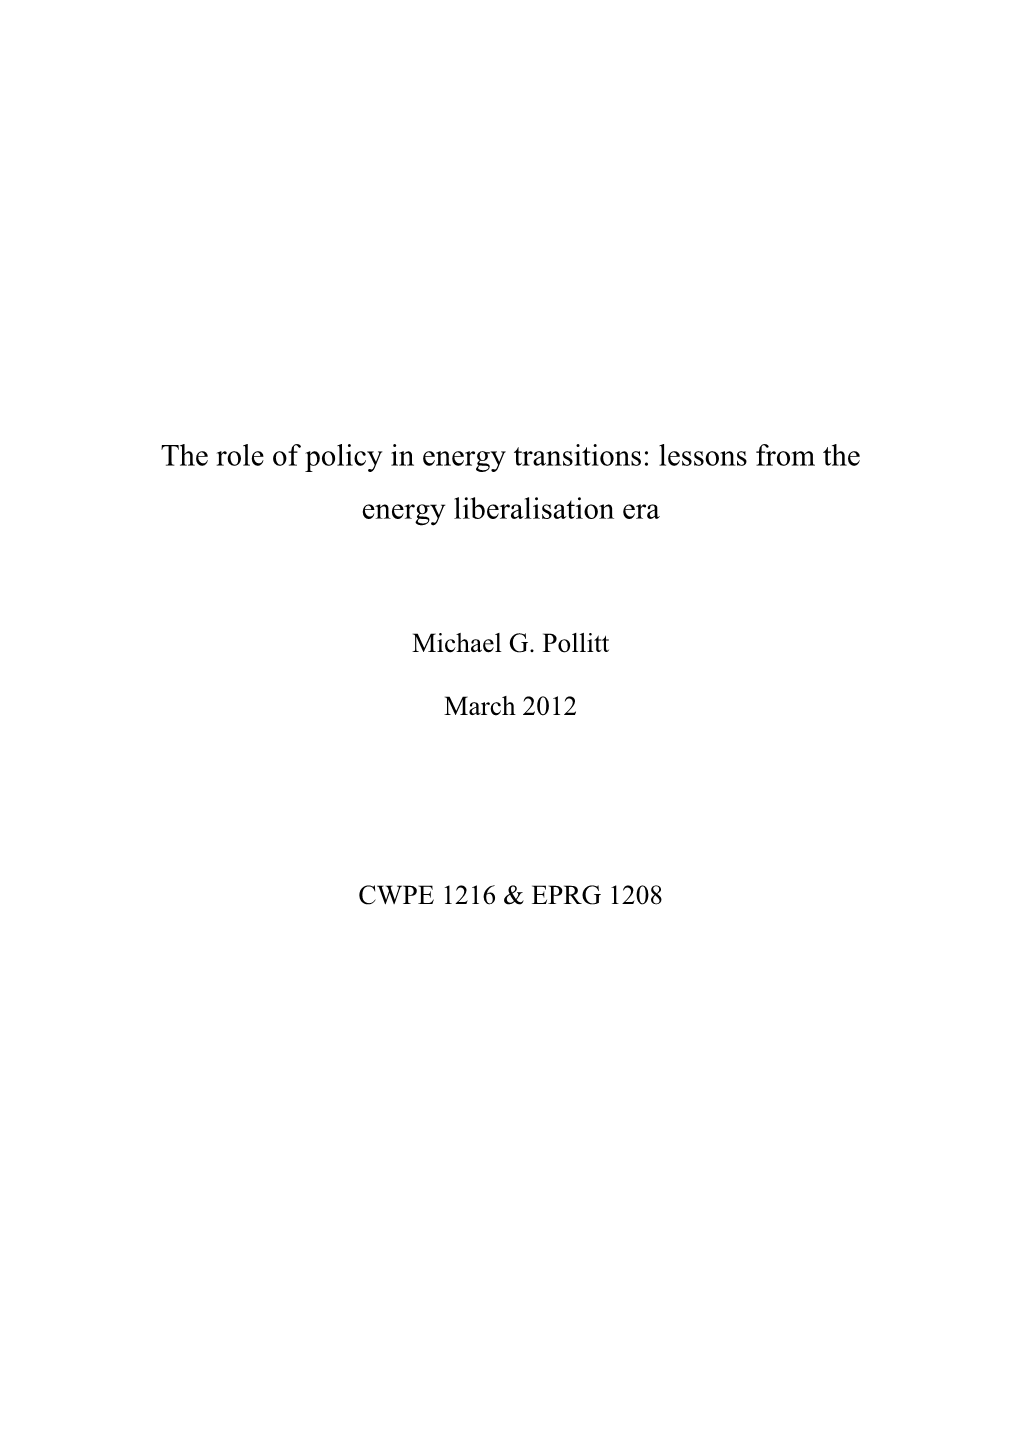 Lessons from the Energy Liberalisation Era